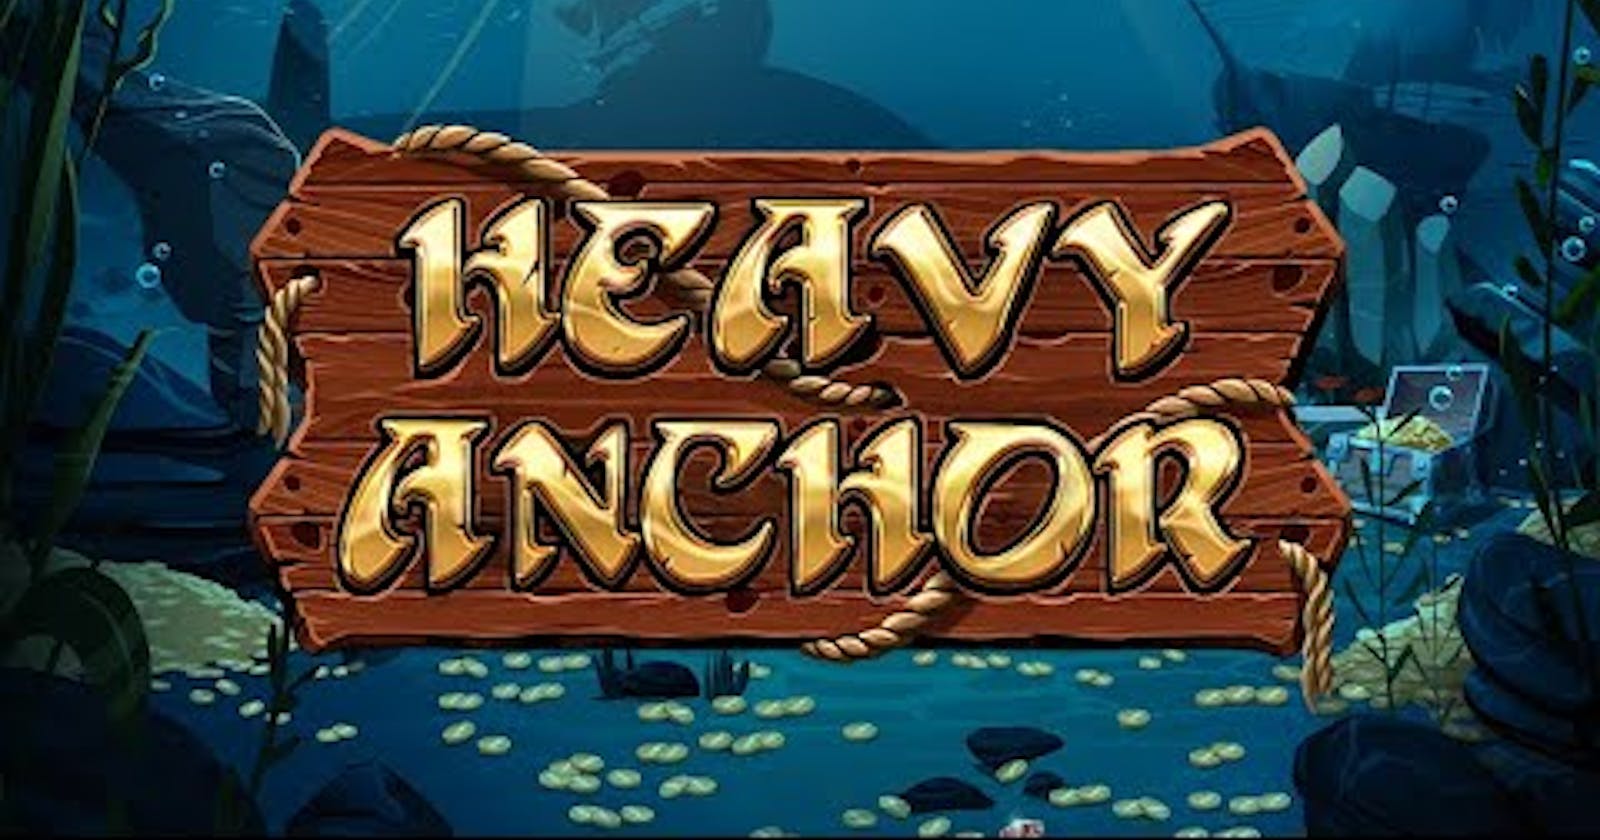 Heavy Anchor Slot Demo Overview (RTP 95.73%)